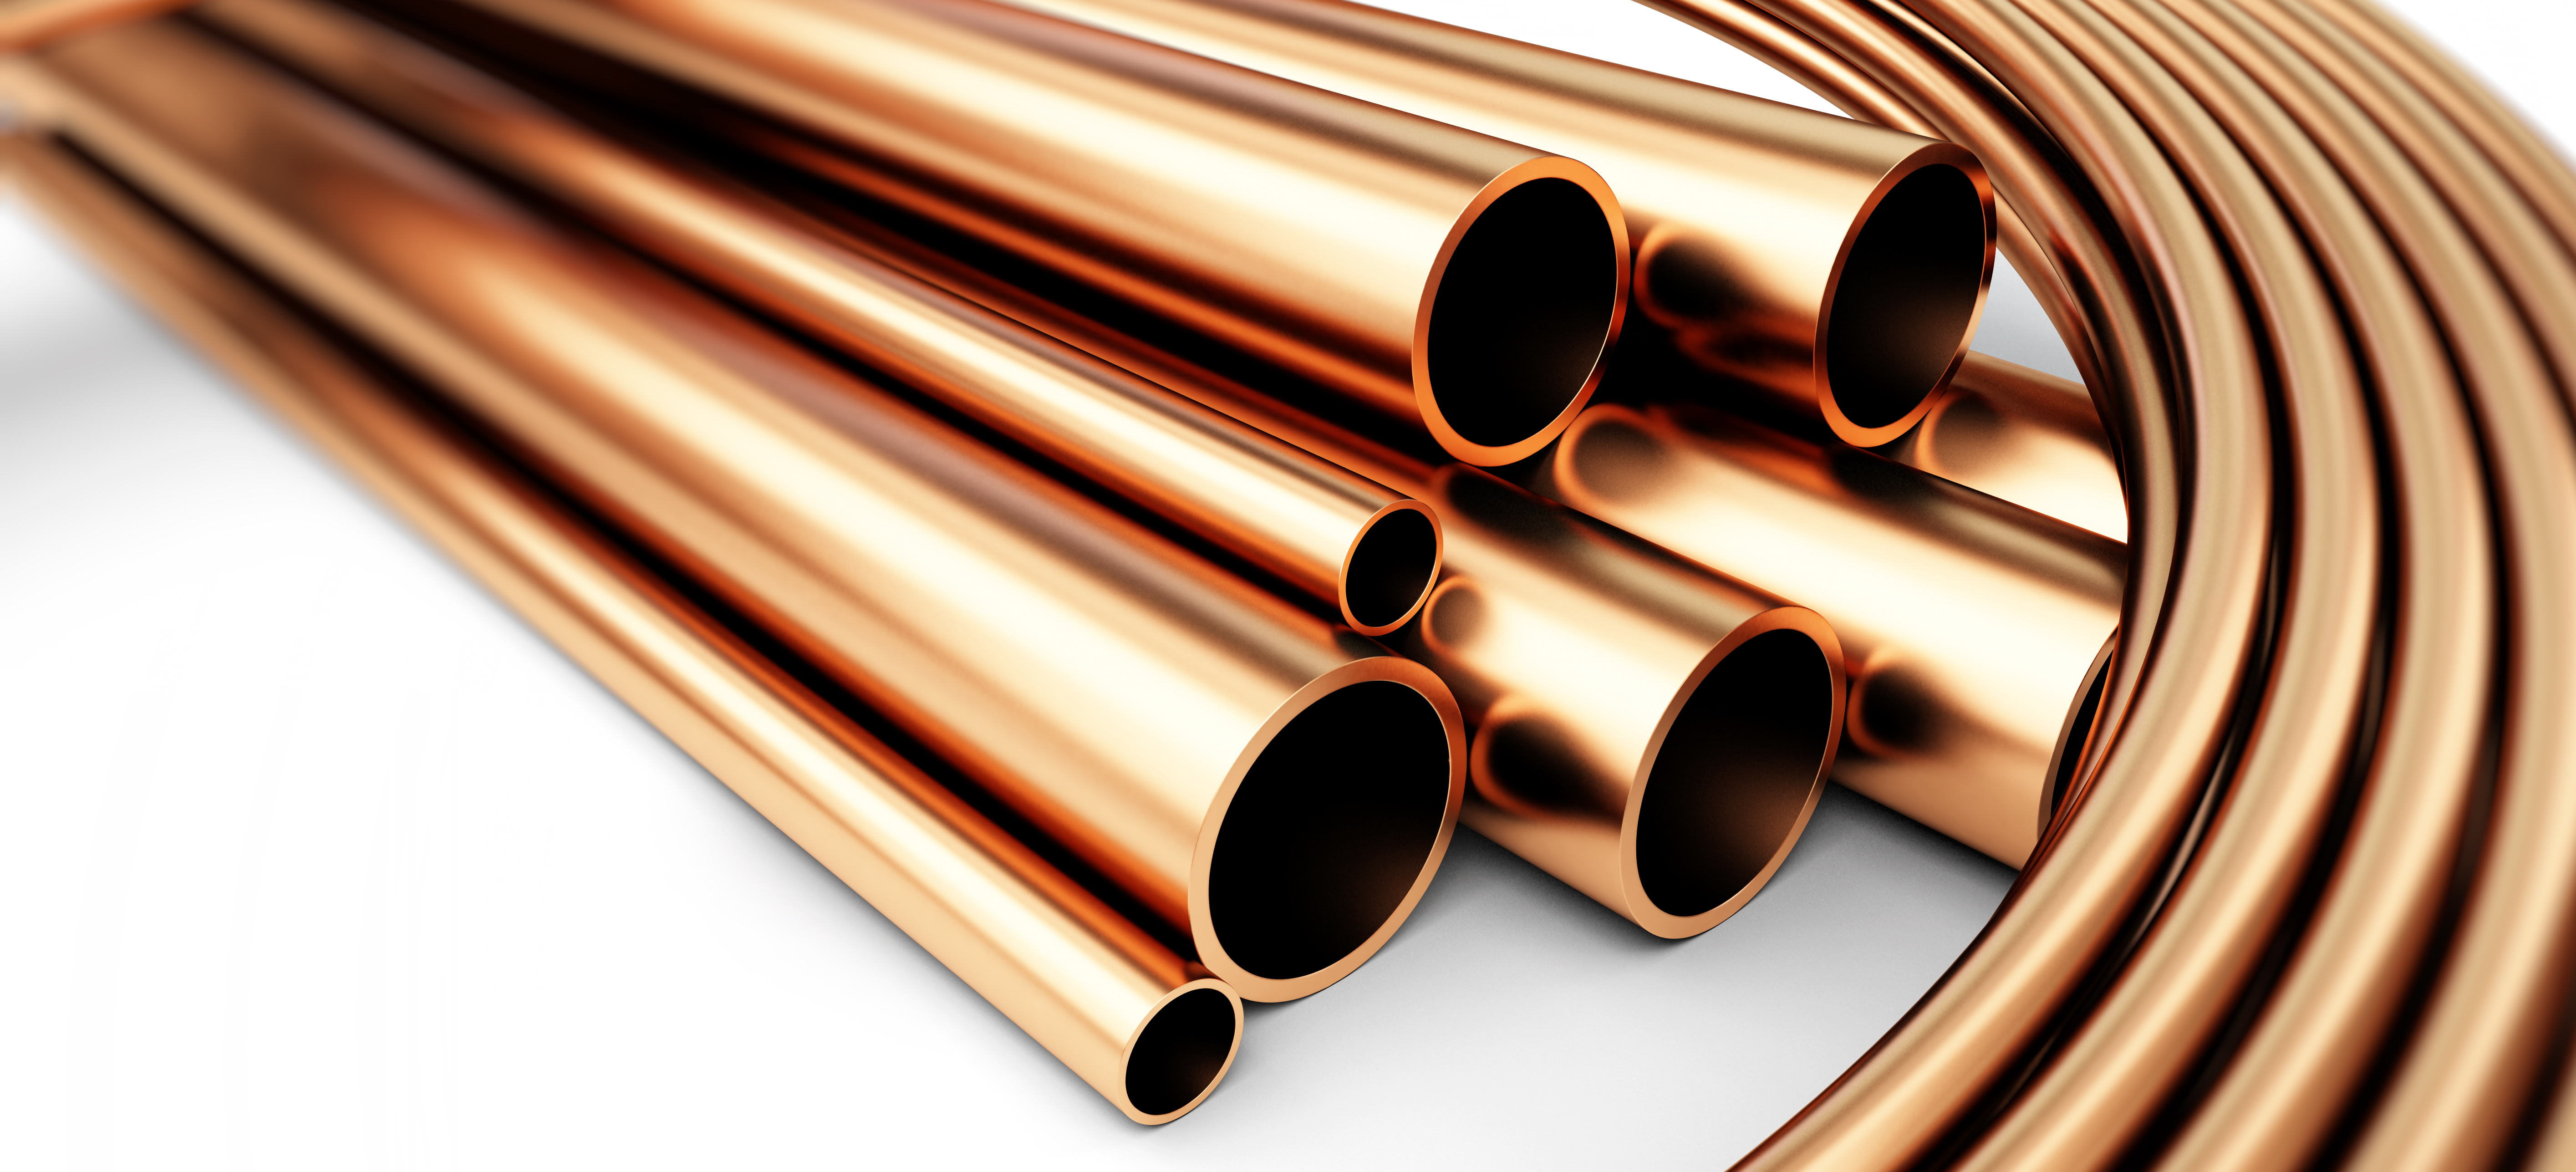 Copper Wave Analysis – 12 February, 2019